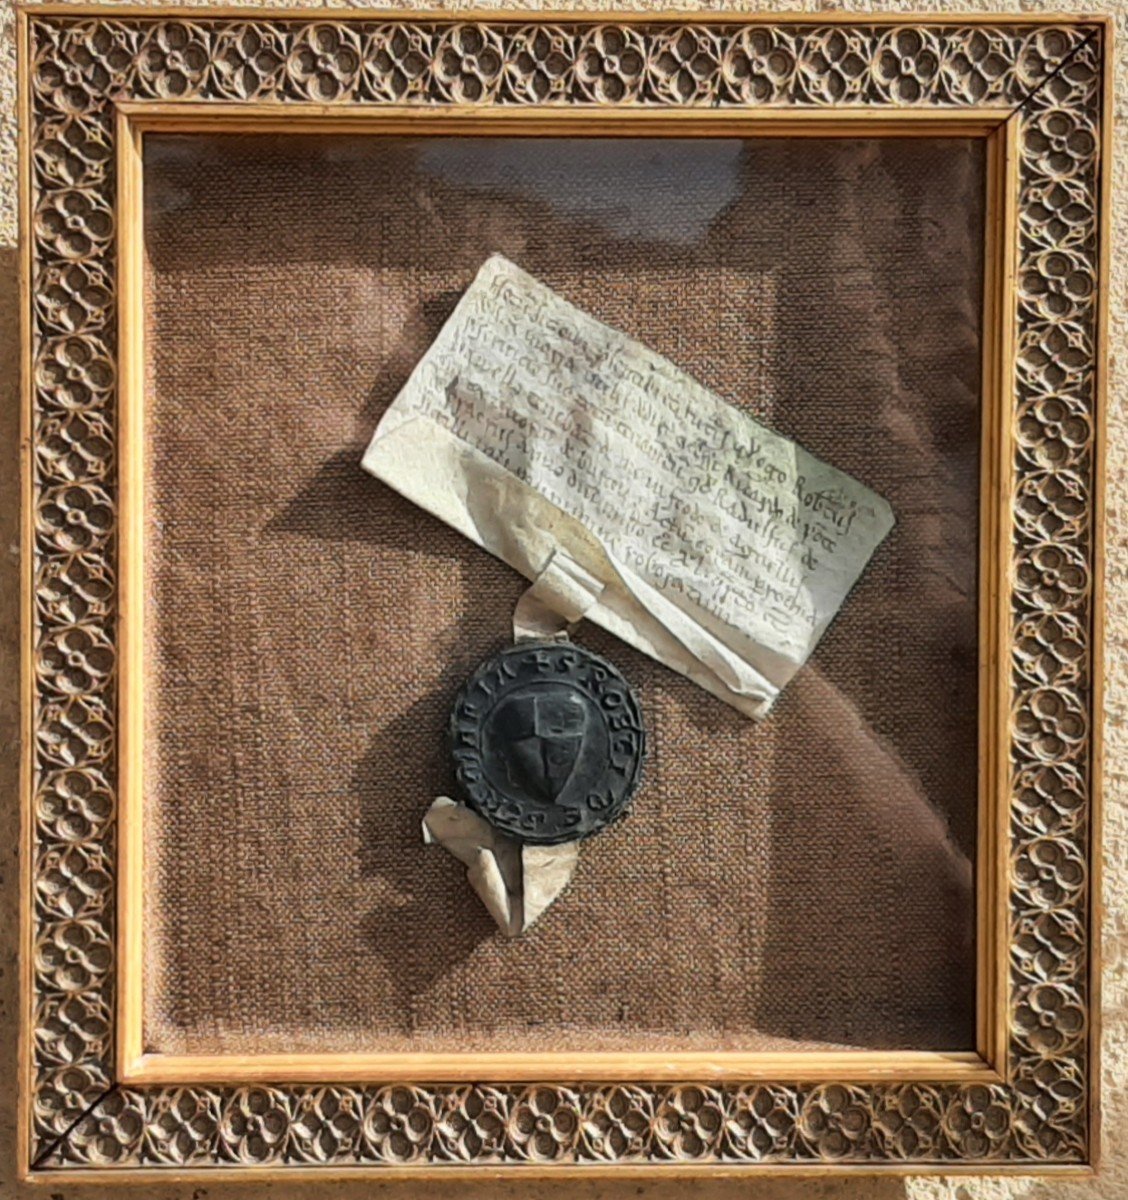 Rare Seal With Its Parchment On Vellum From The 13th Century